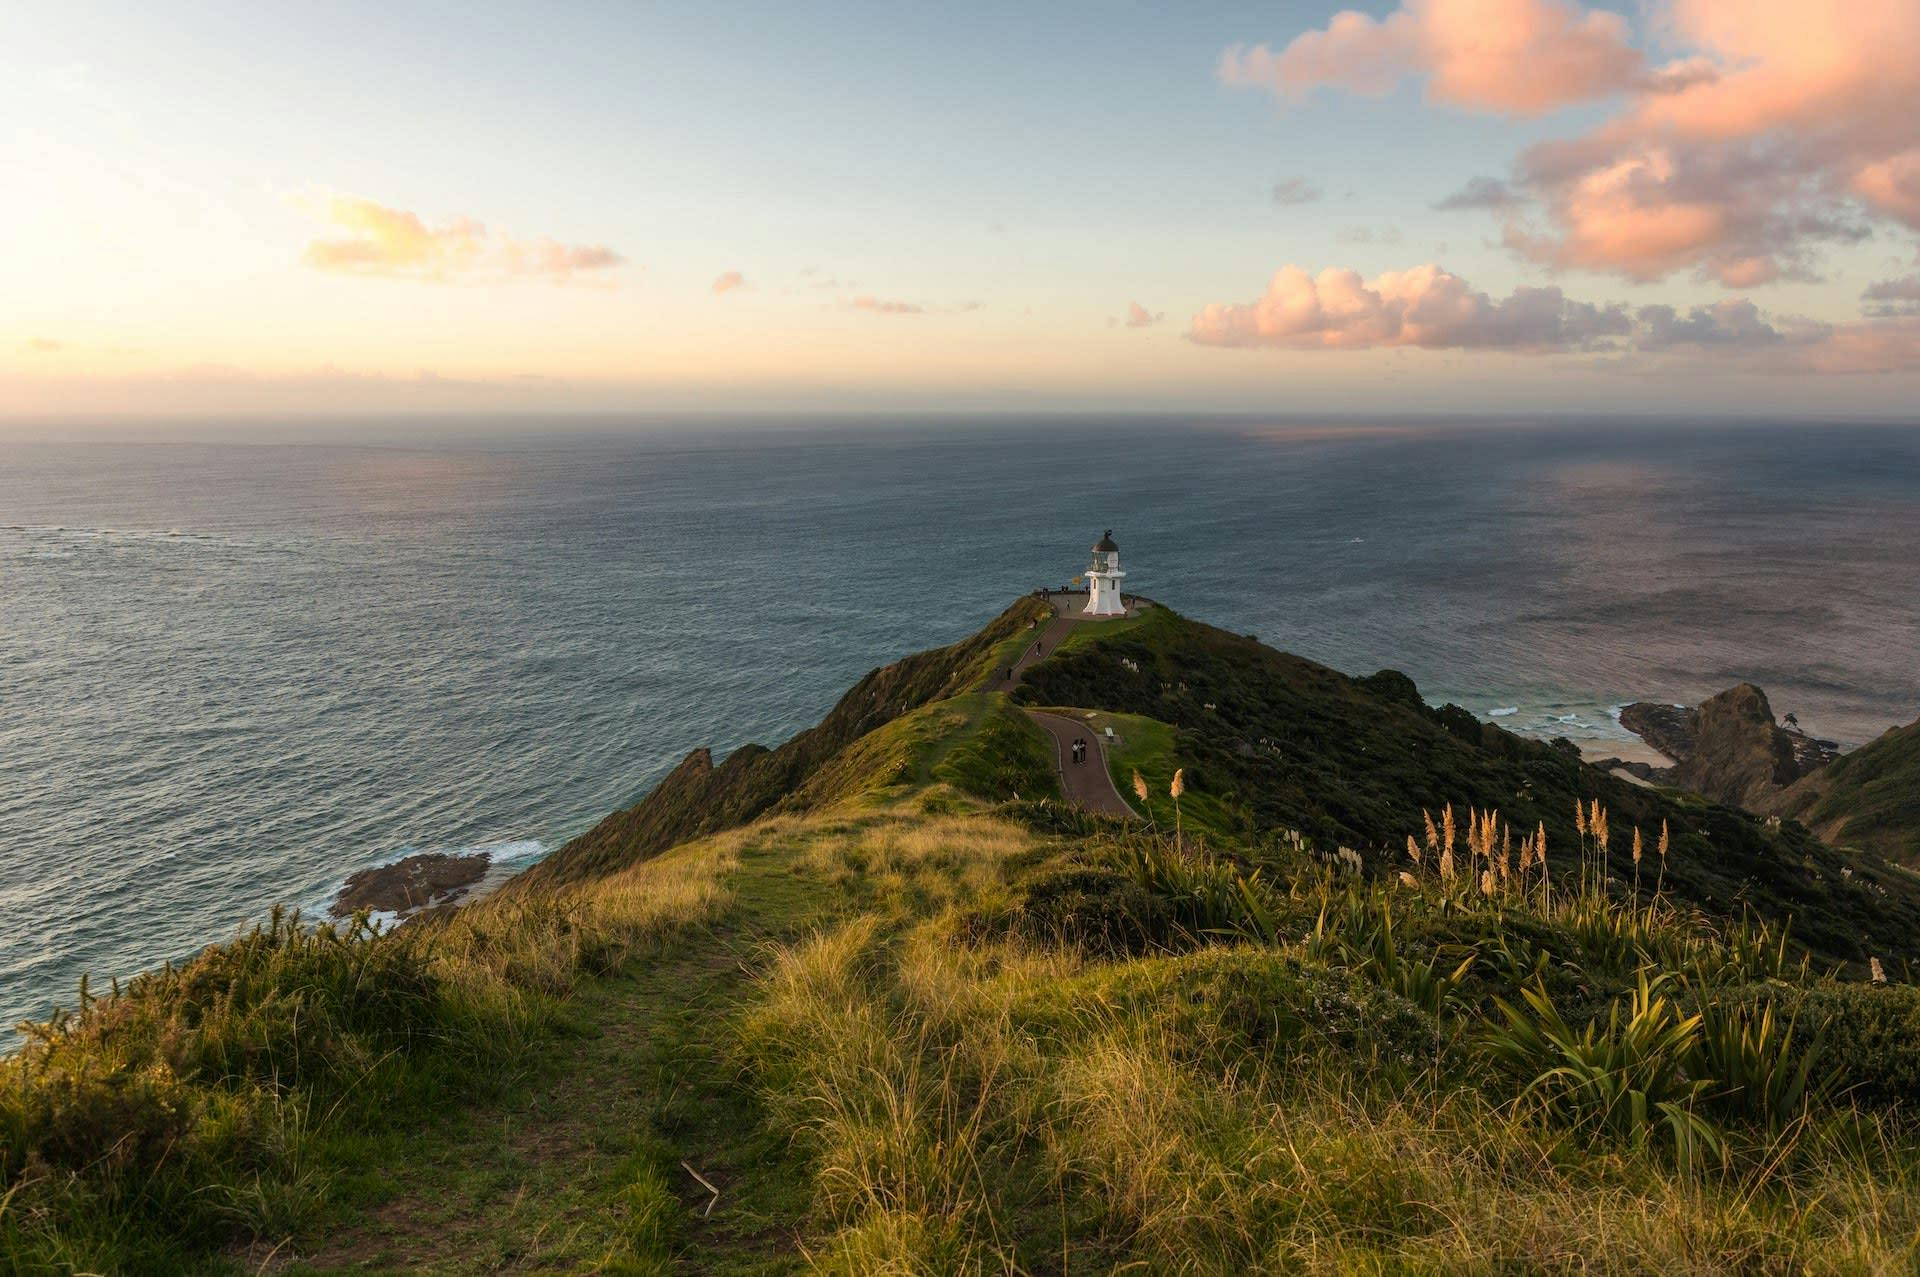 Cape Reinga lighthouse - northernmost point of New Zealand